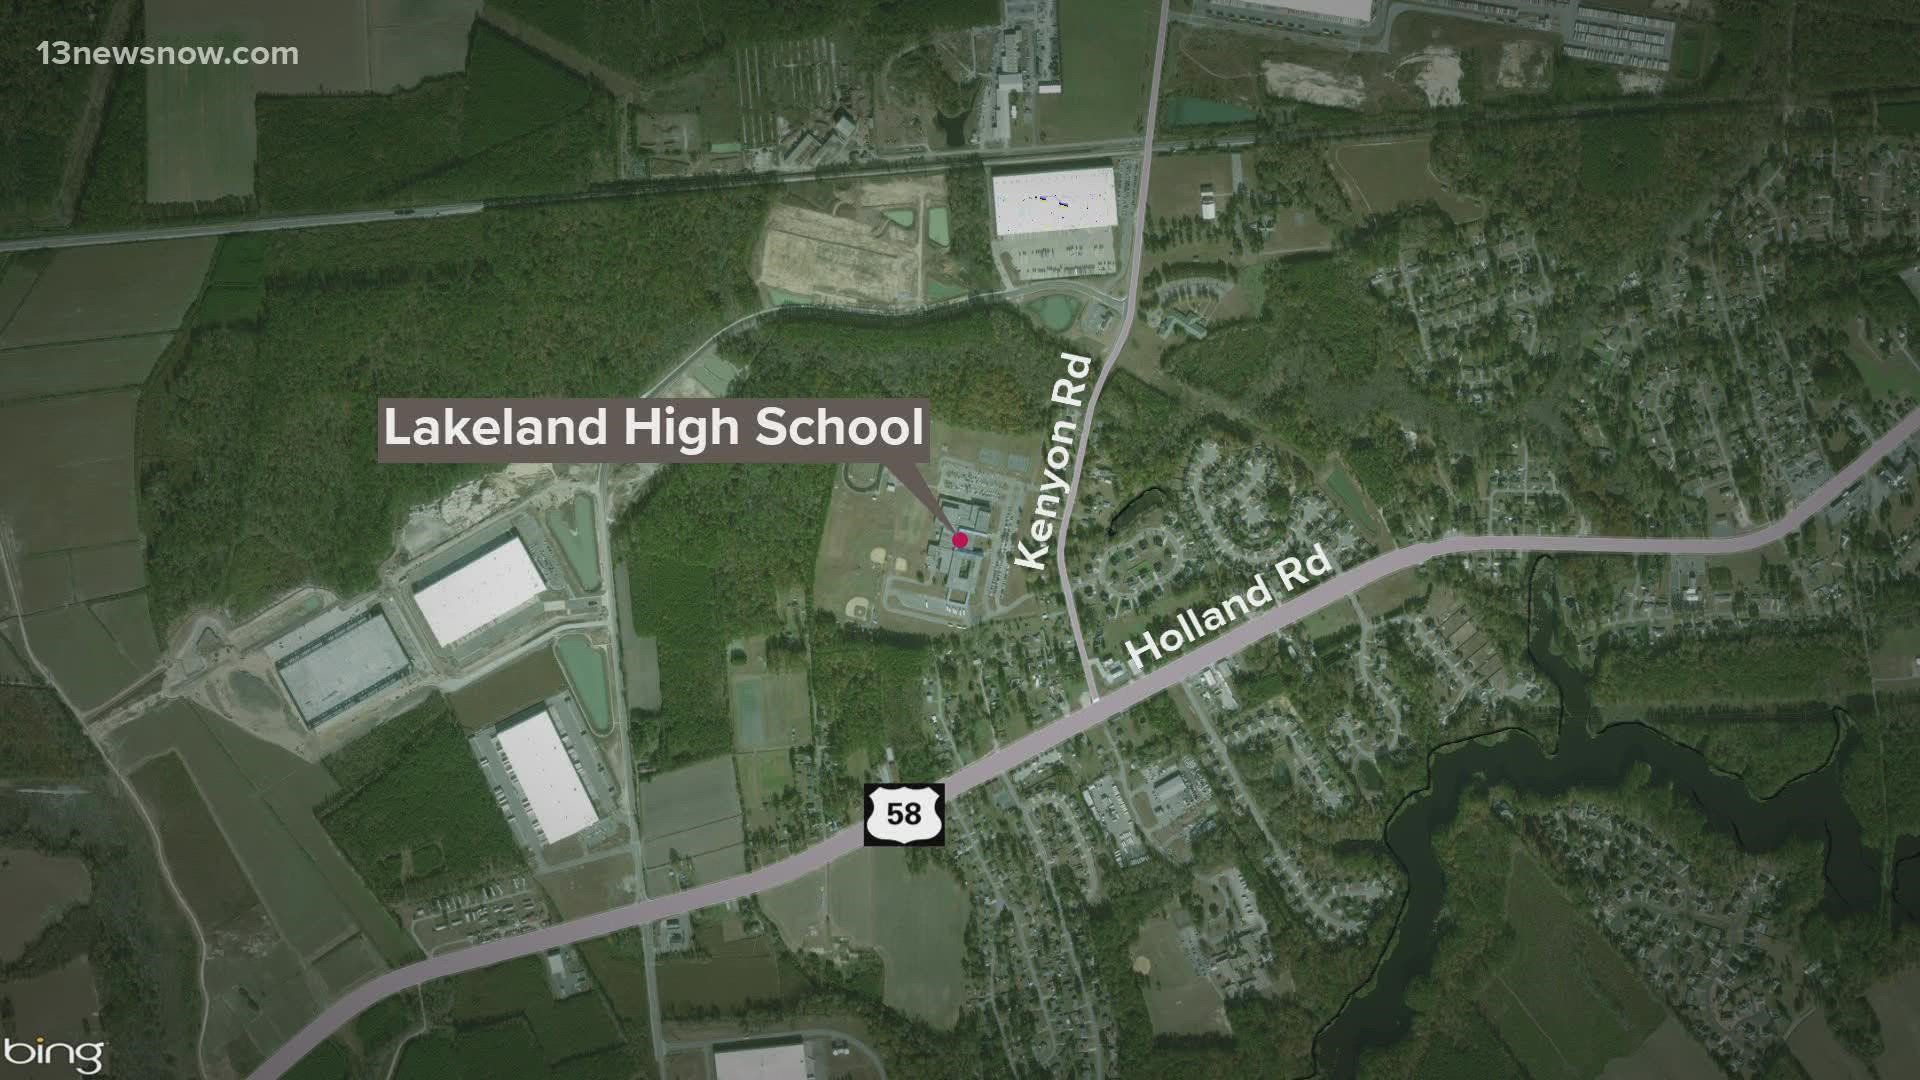 Officers responded to Lakeland High School when administrators told them a student may have had a weapon. The school went on lockdown.